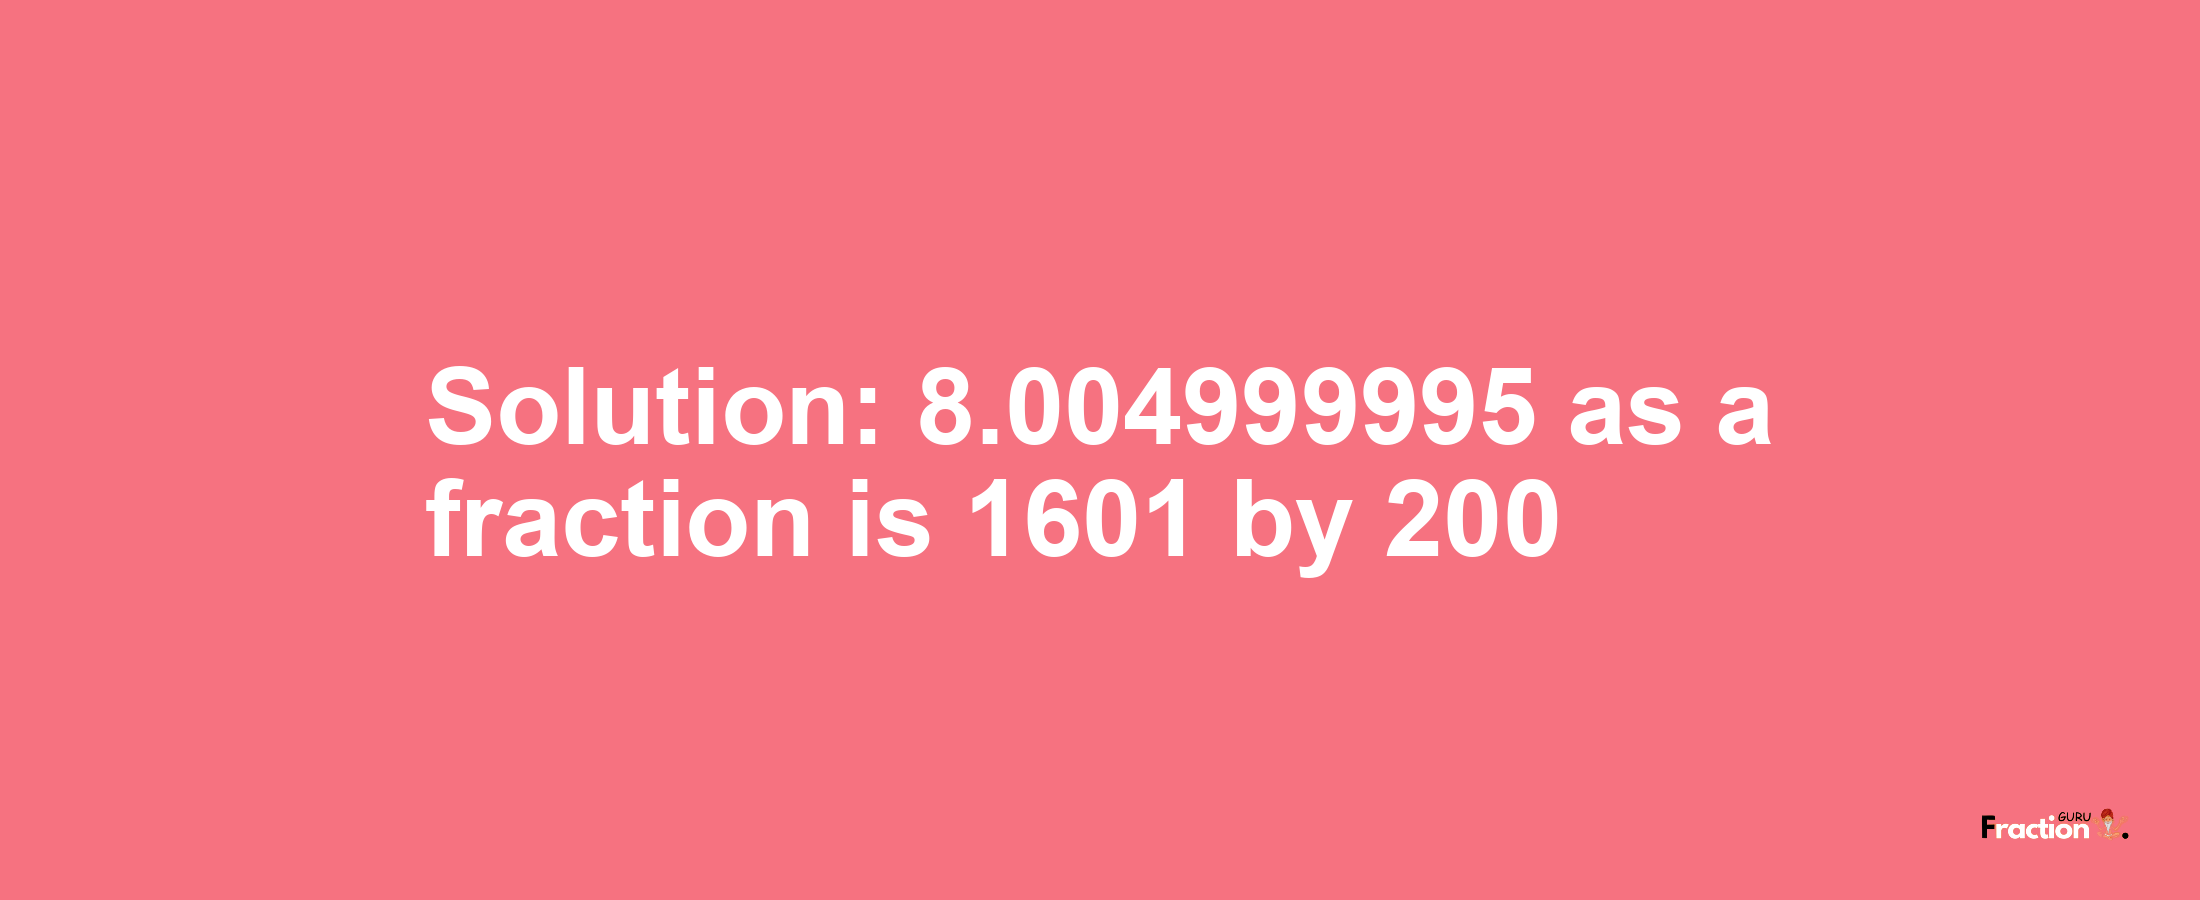 Solution:8.004999995 as a fraction is 1601/200